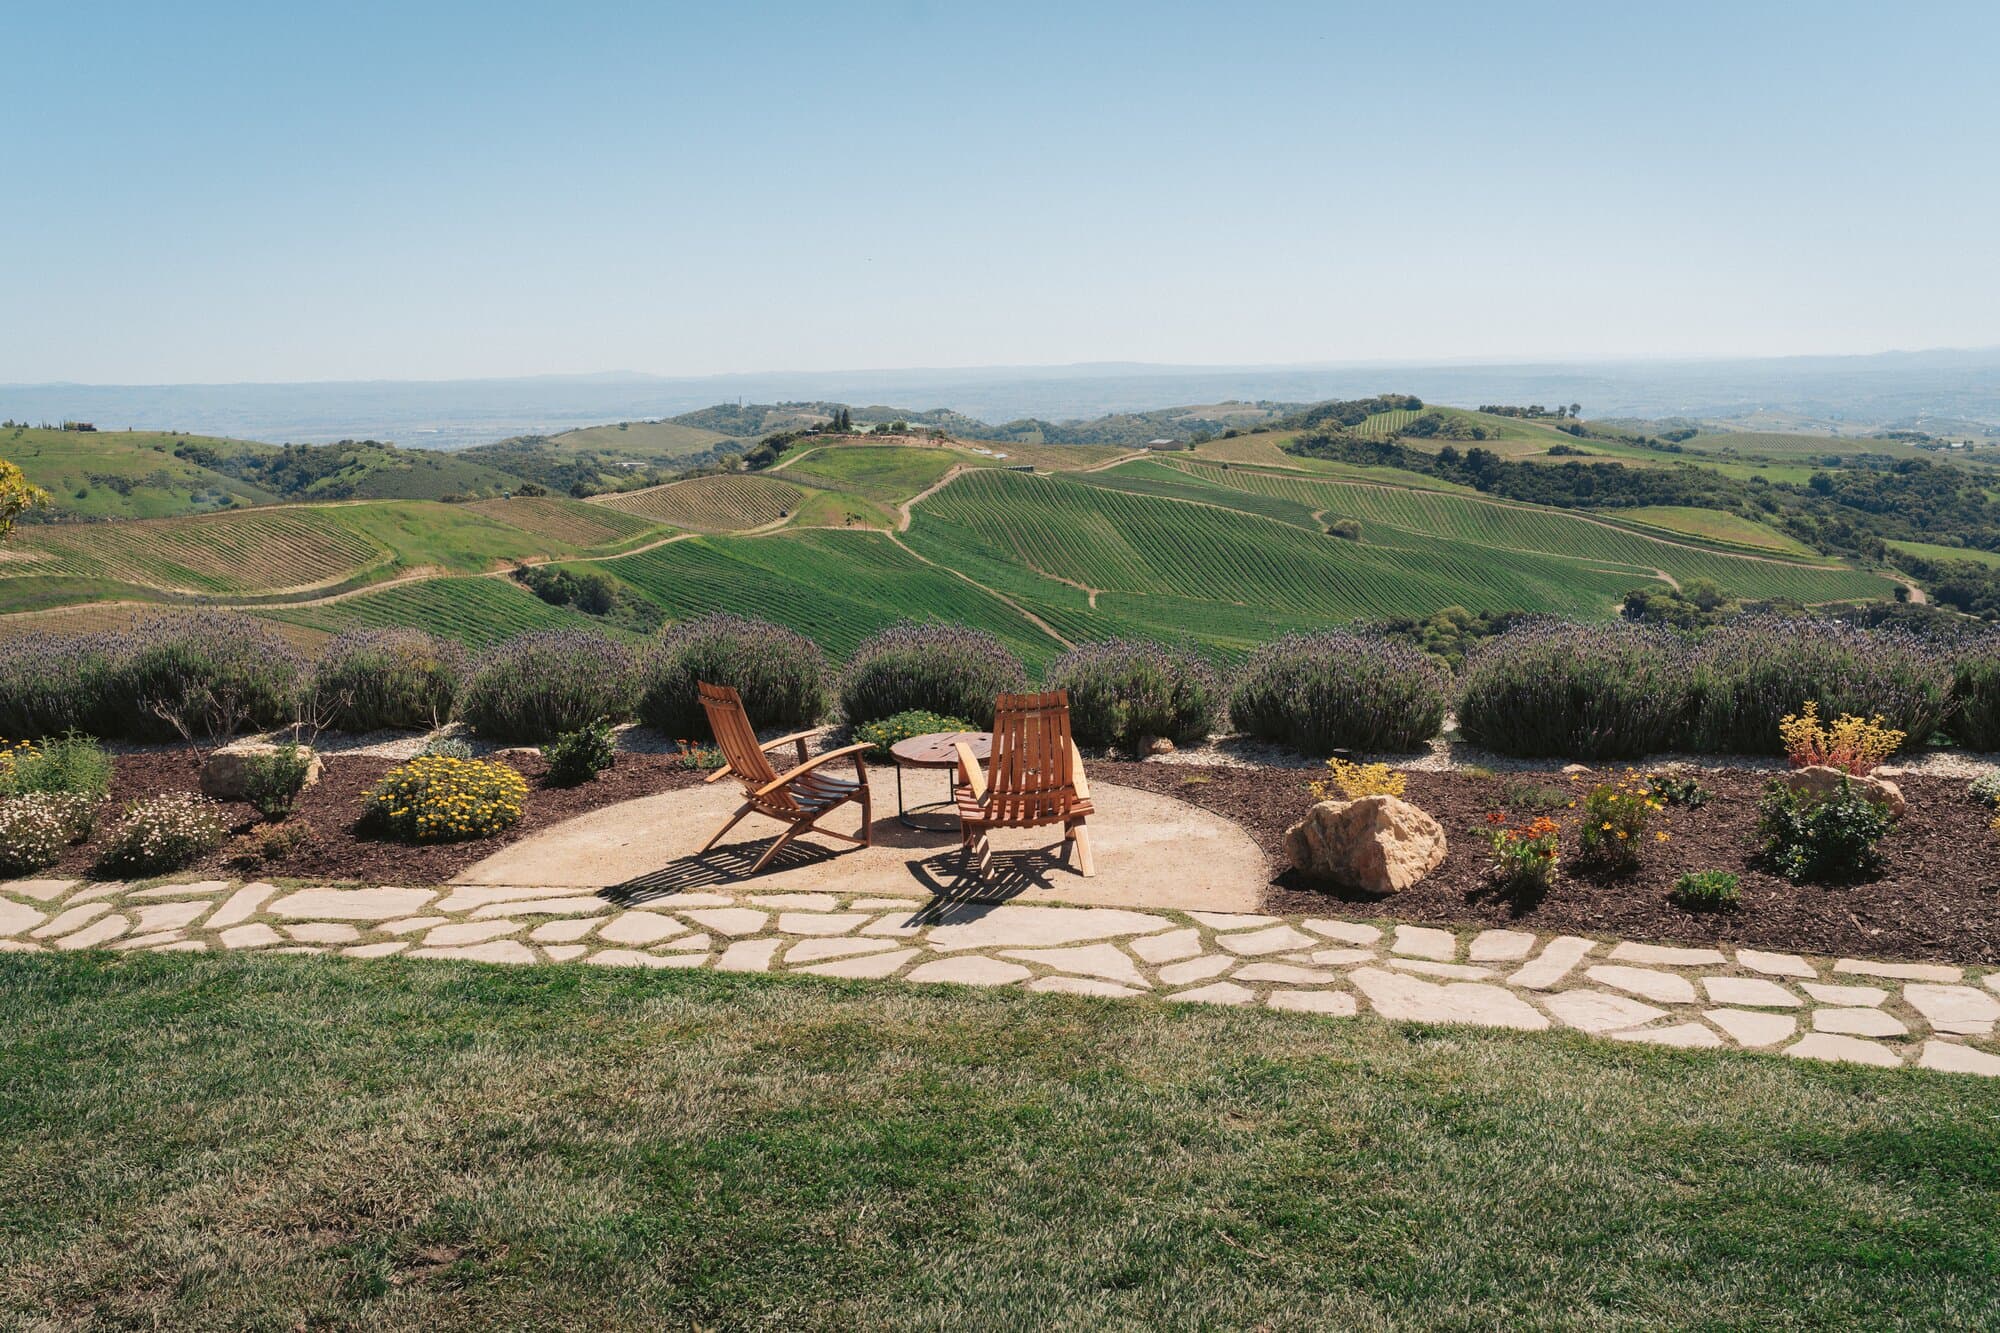 Two women wine tasting in Paso Robles